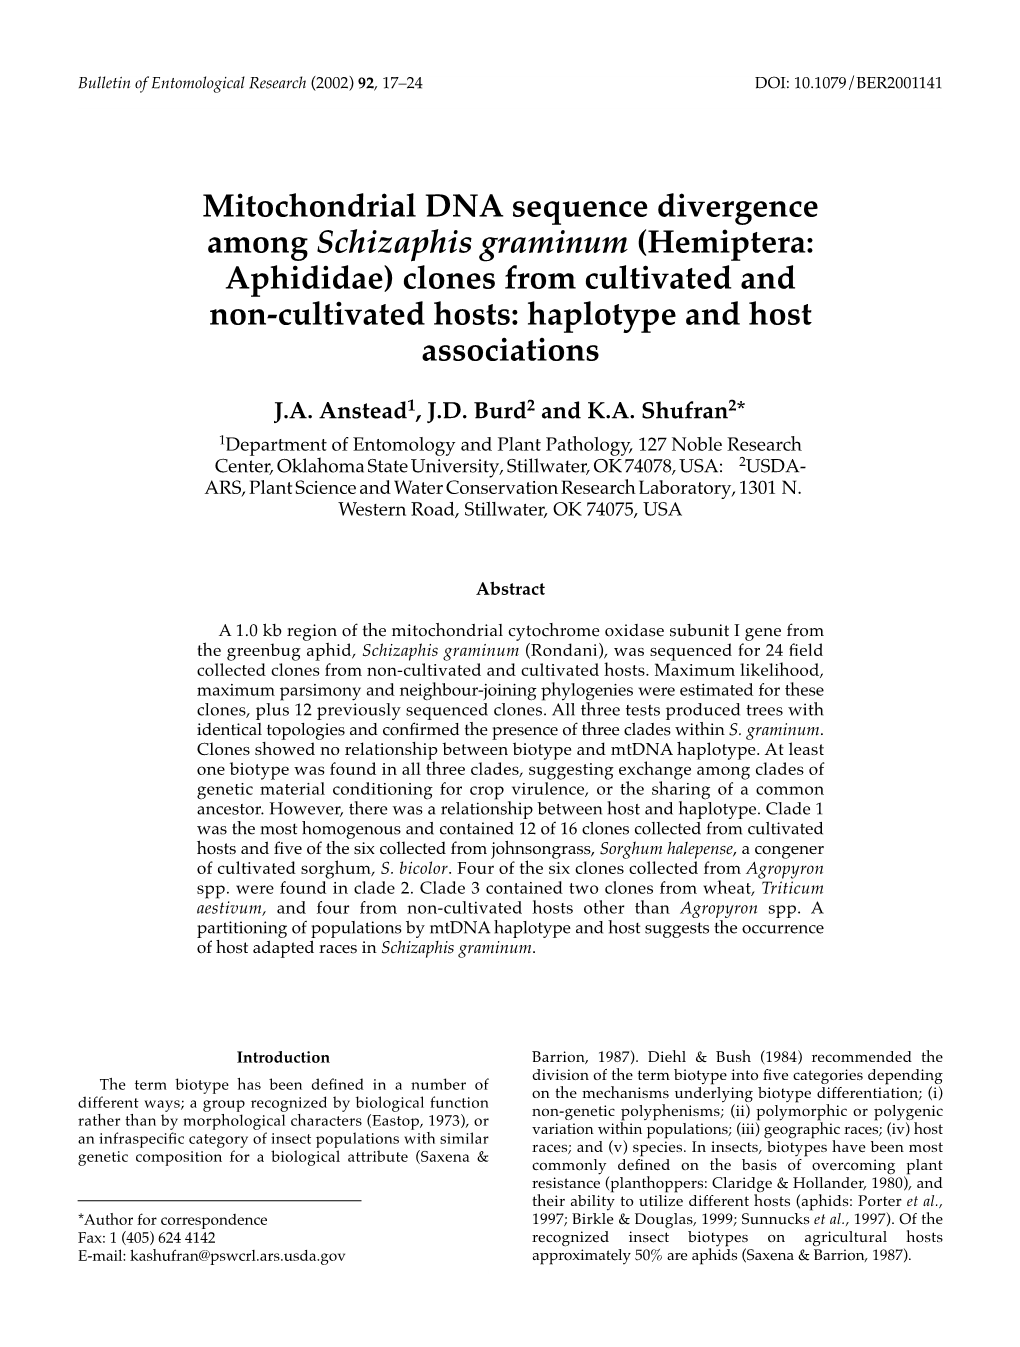 Mitochondrial DNA Sequence Divergence Among Schizaphis